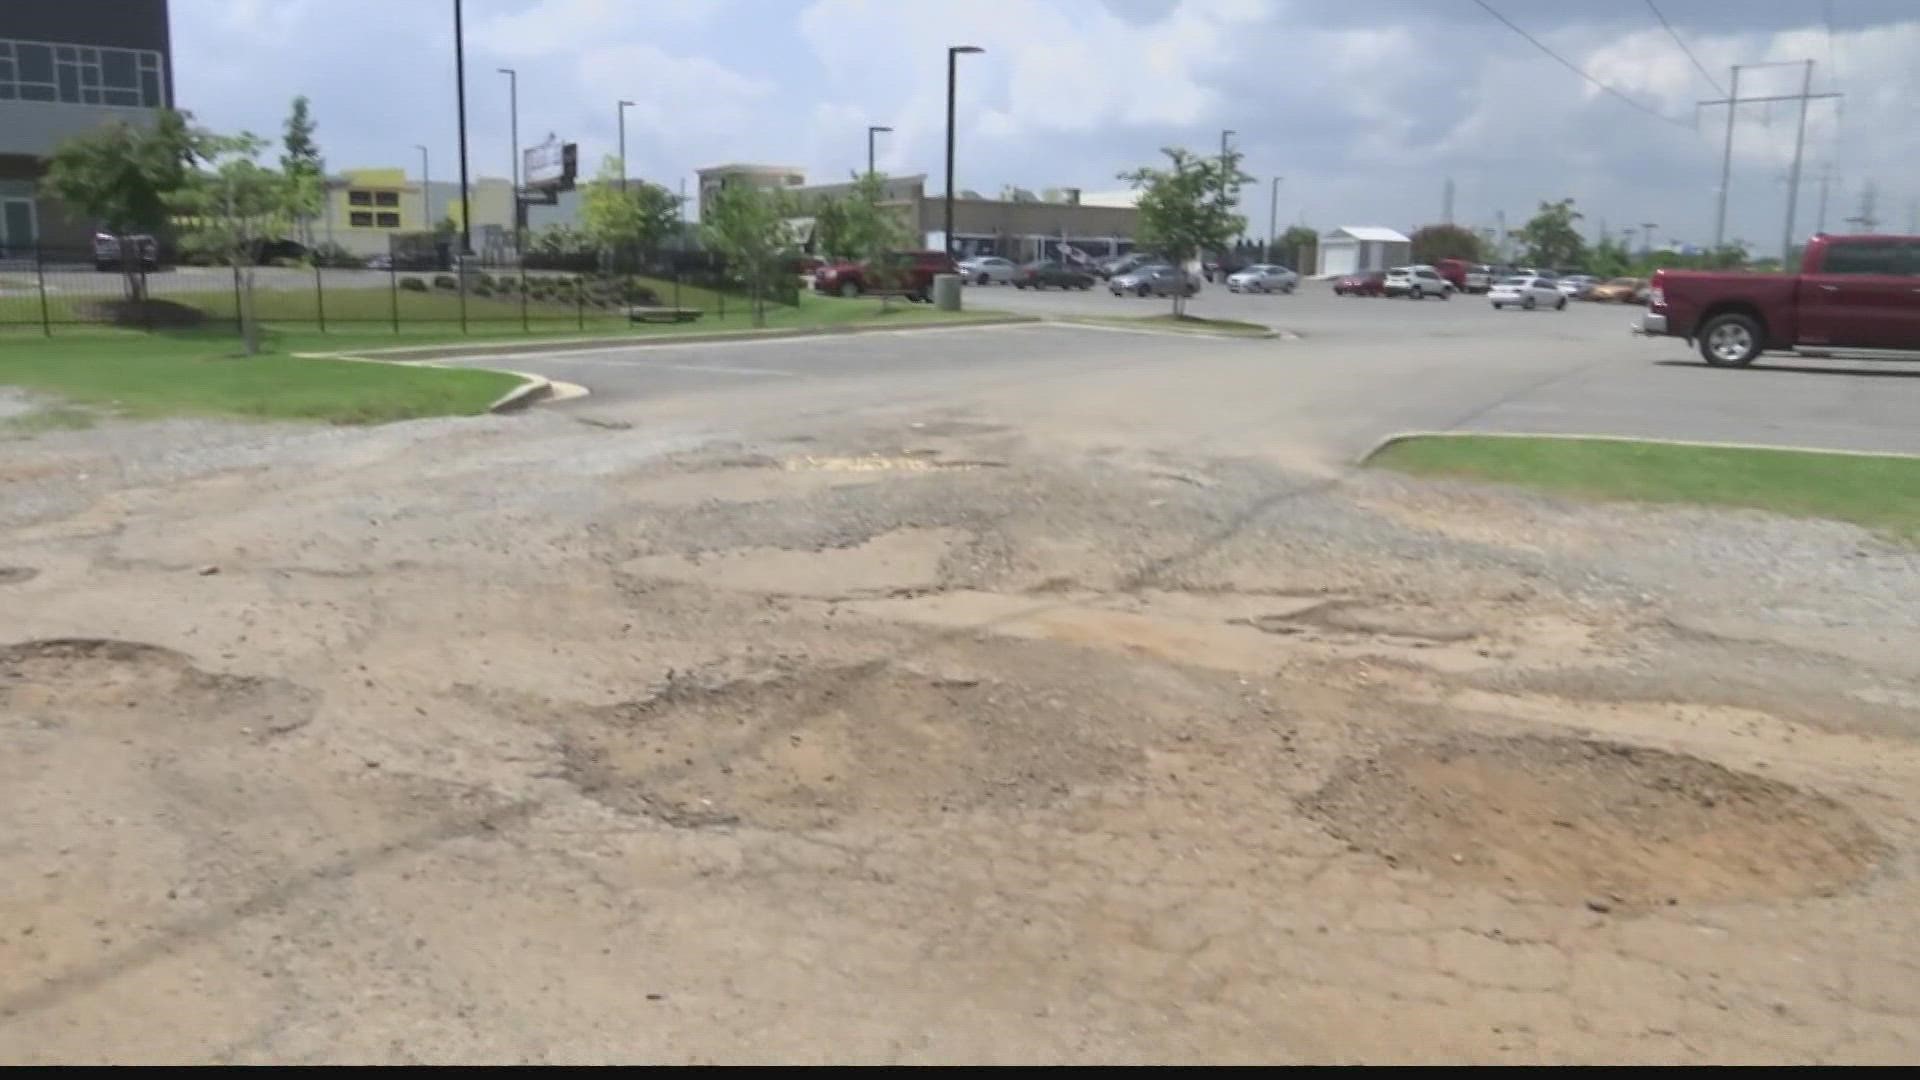 Potholes and poor roads, we've seen them all. However, one Huntsville City Council member wants to see them gone.